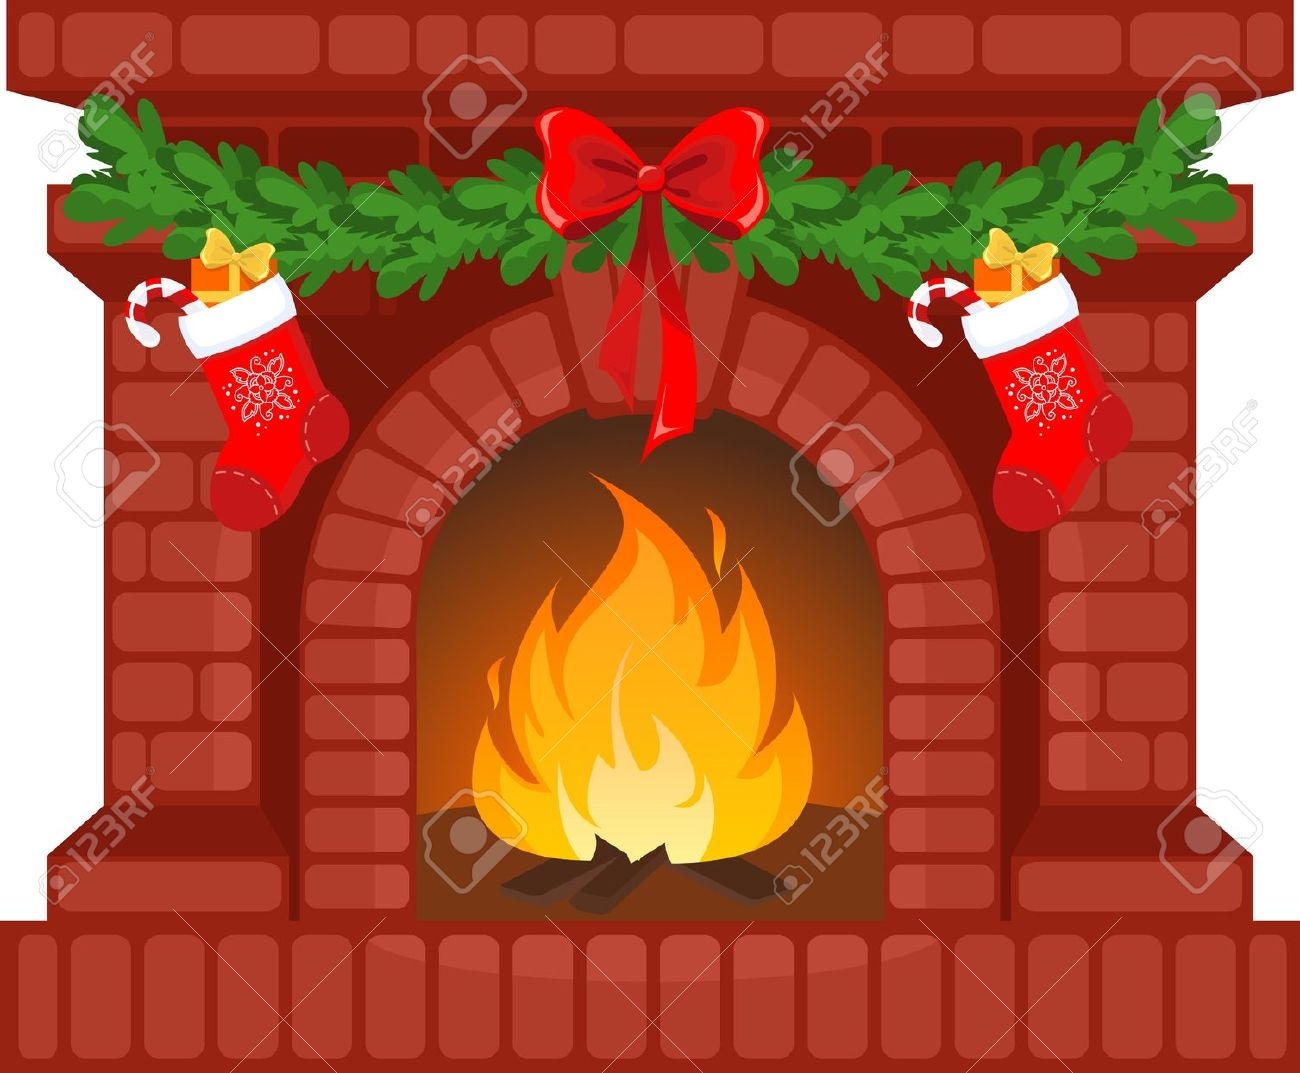 Free Holiday Fireplace Cliparts, Download Free Clip Art.